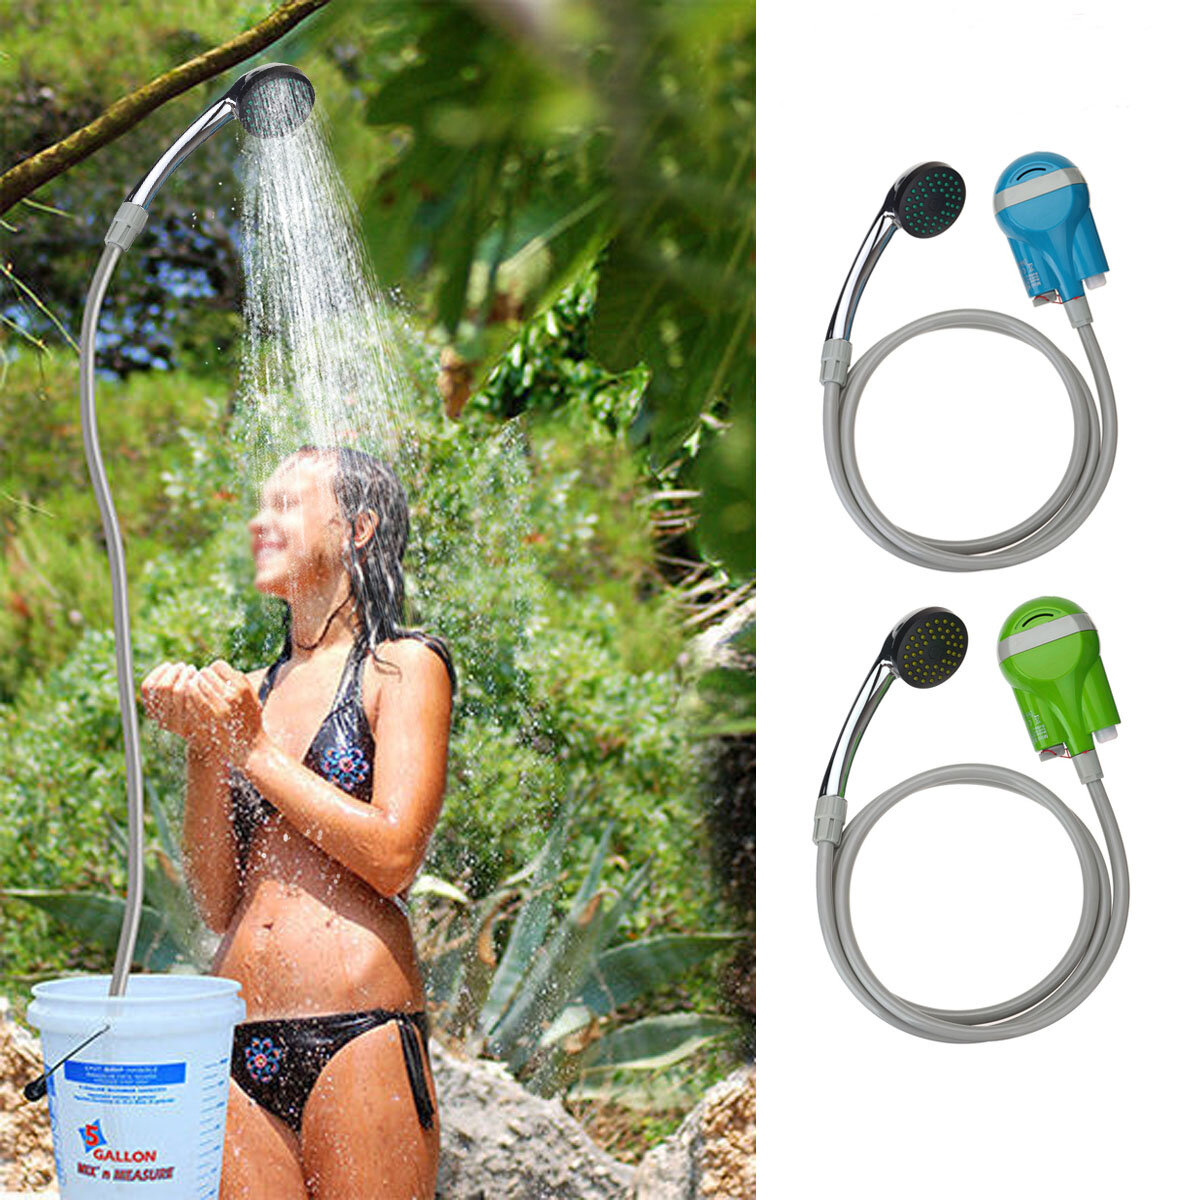 IPRee? Portable Shower Water Pump USB Rechargeable Nozzle Handheld Water Spary Shower Faucet Camping